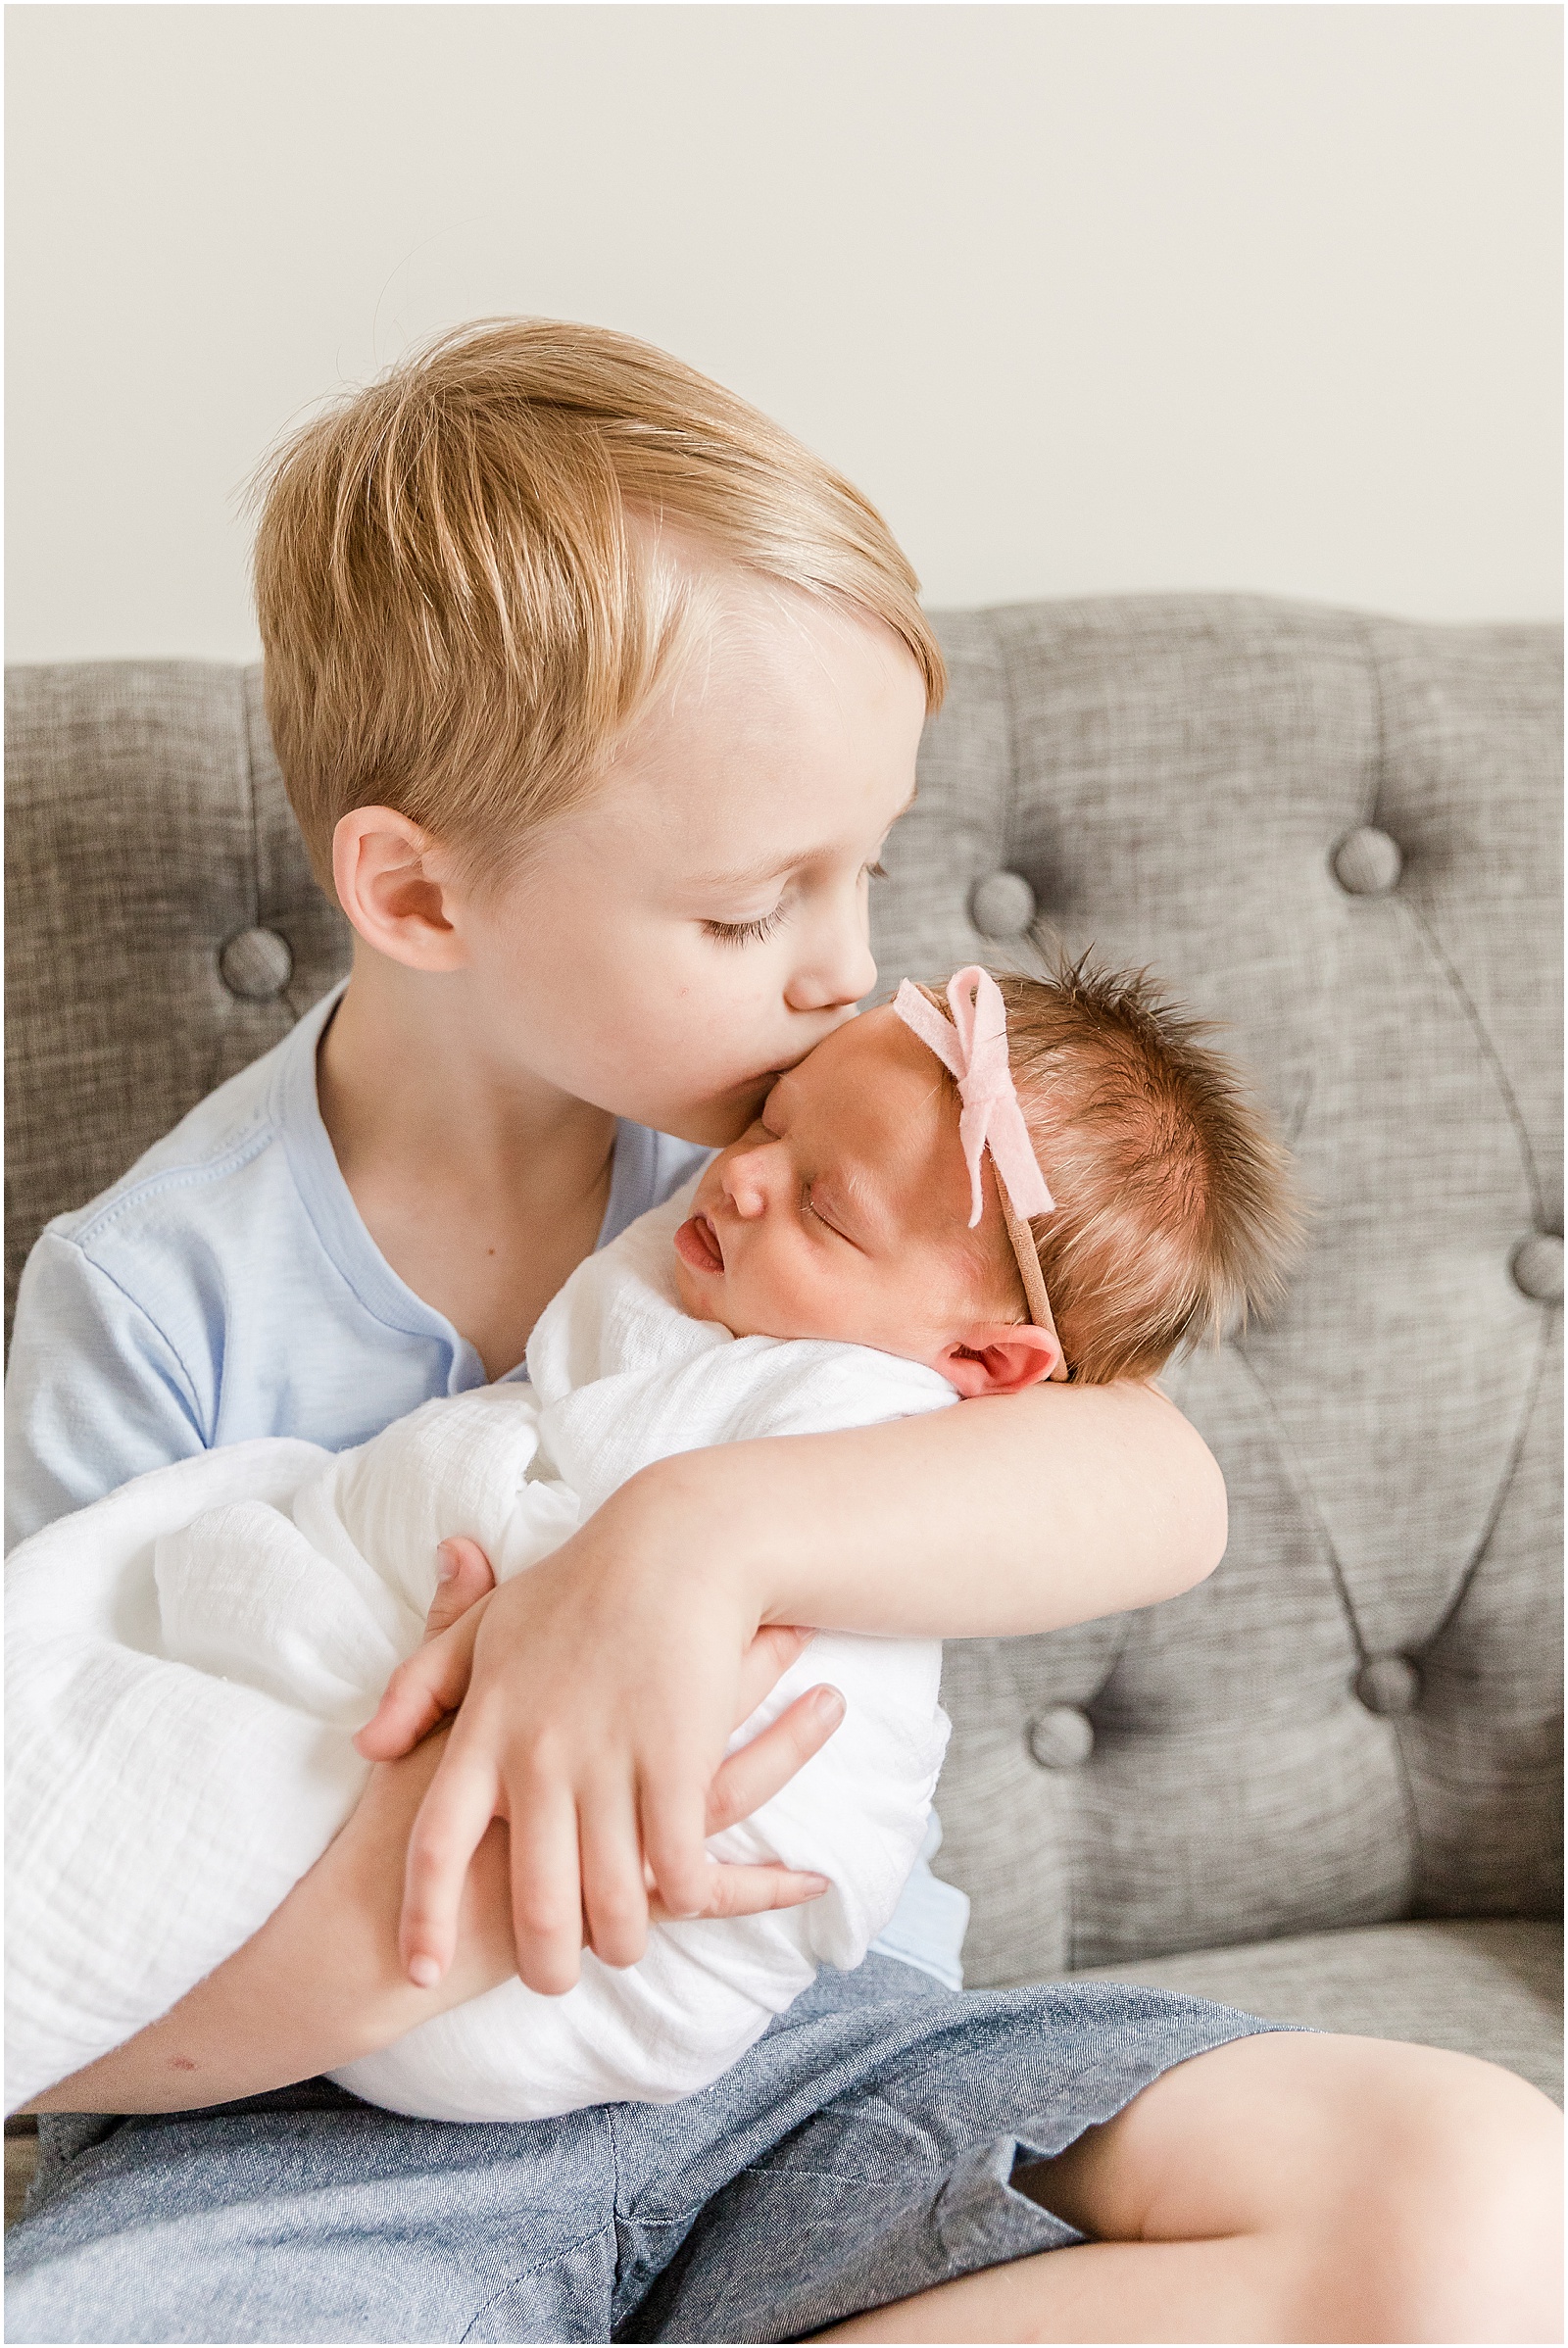 Young boy holding his newborn baby sister and kissing her forehead